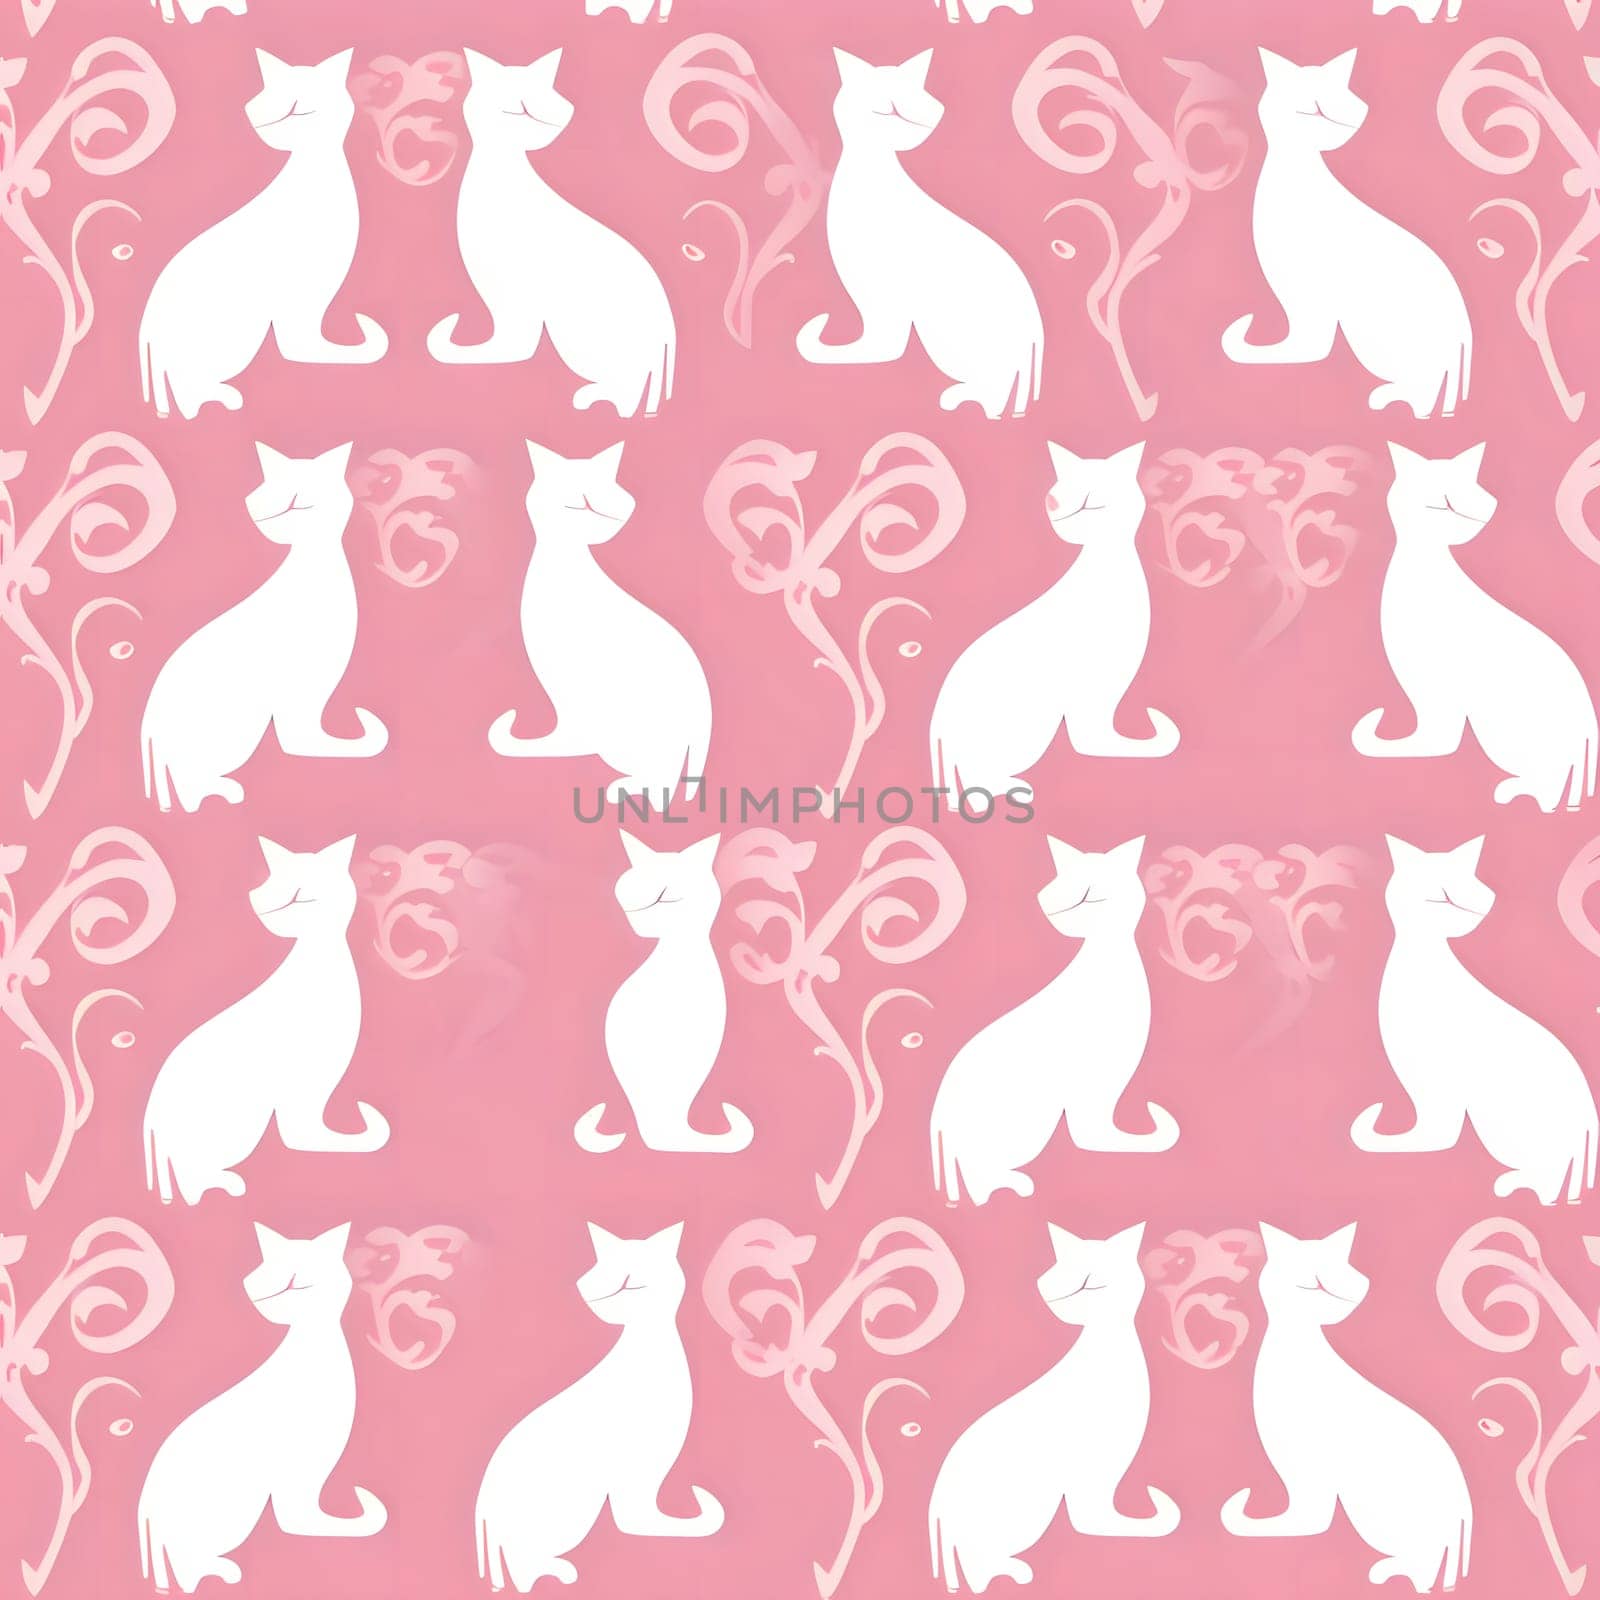 Patterns and banners backgrounds: Seamless pattern with cats silhouettes on a pink background.